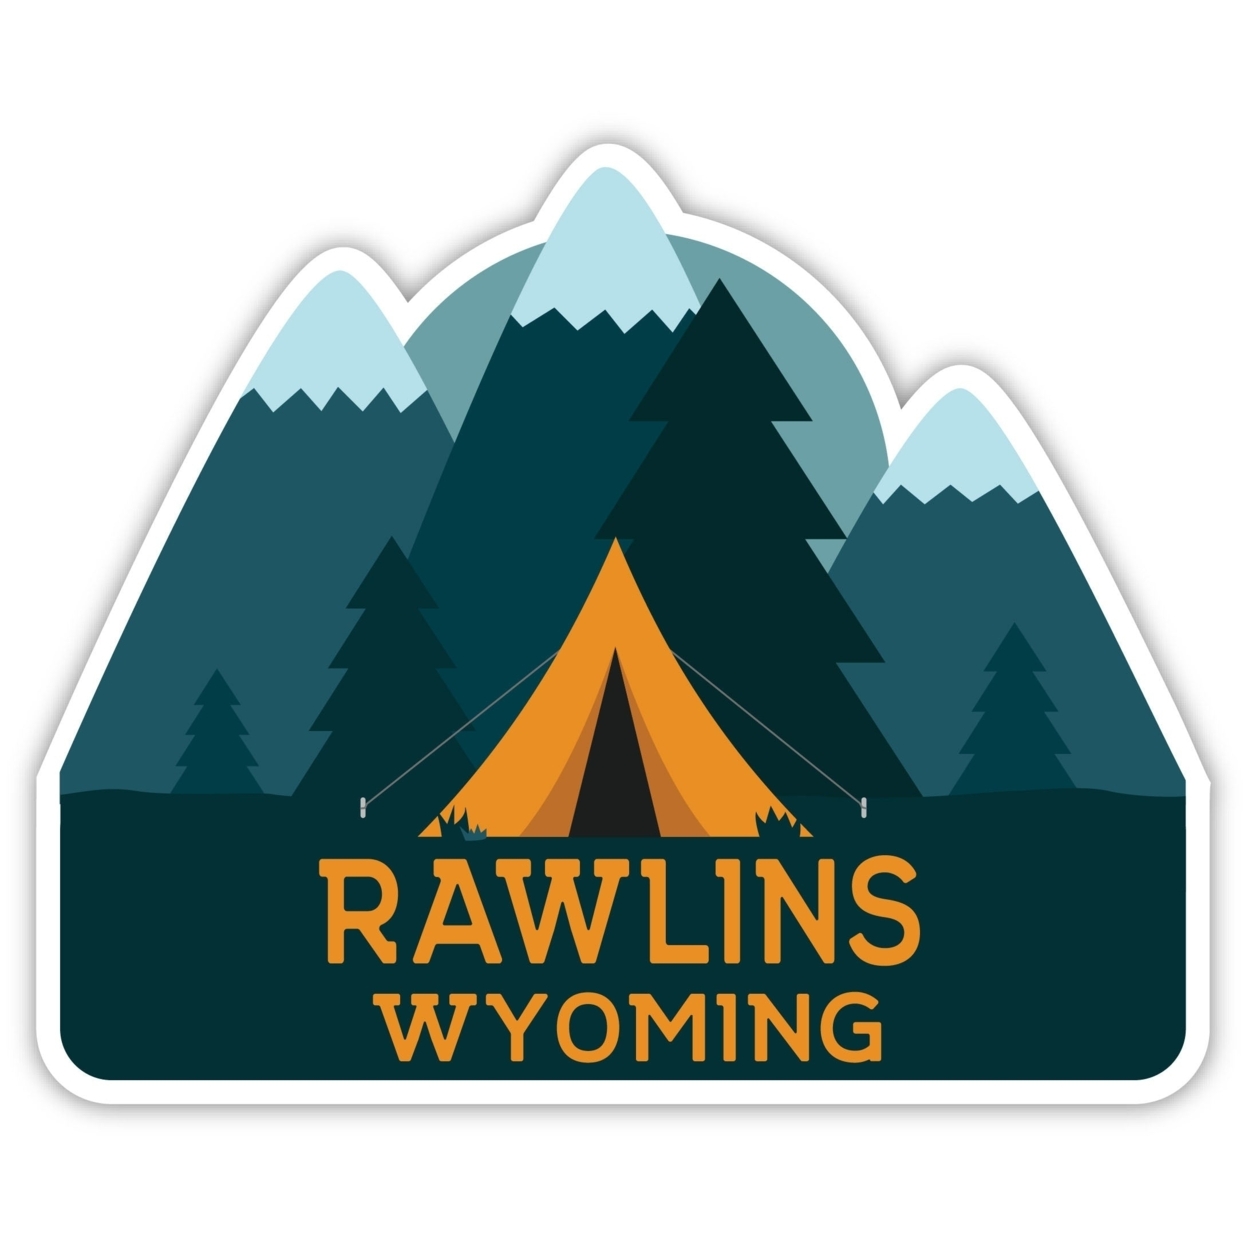 Rawlins Wyoming Souvenir Decorative Stickers (Choose Theme And Size) - Single Unit, 2-Inch, Adventures Awaits